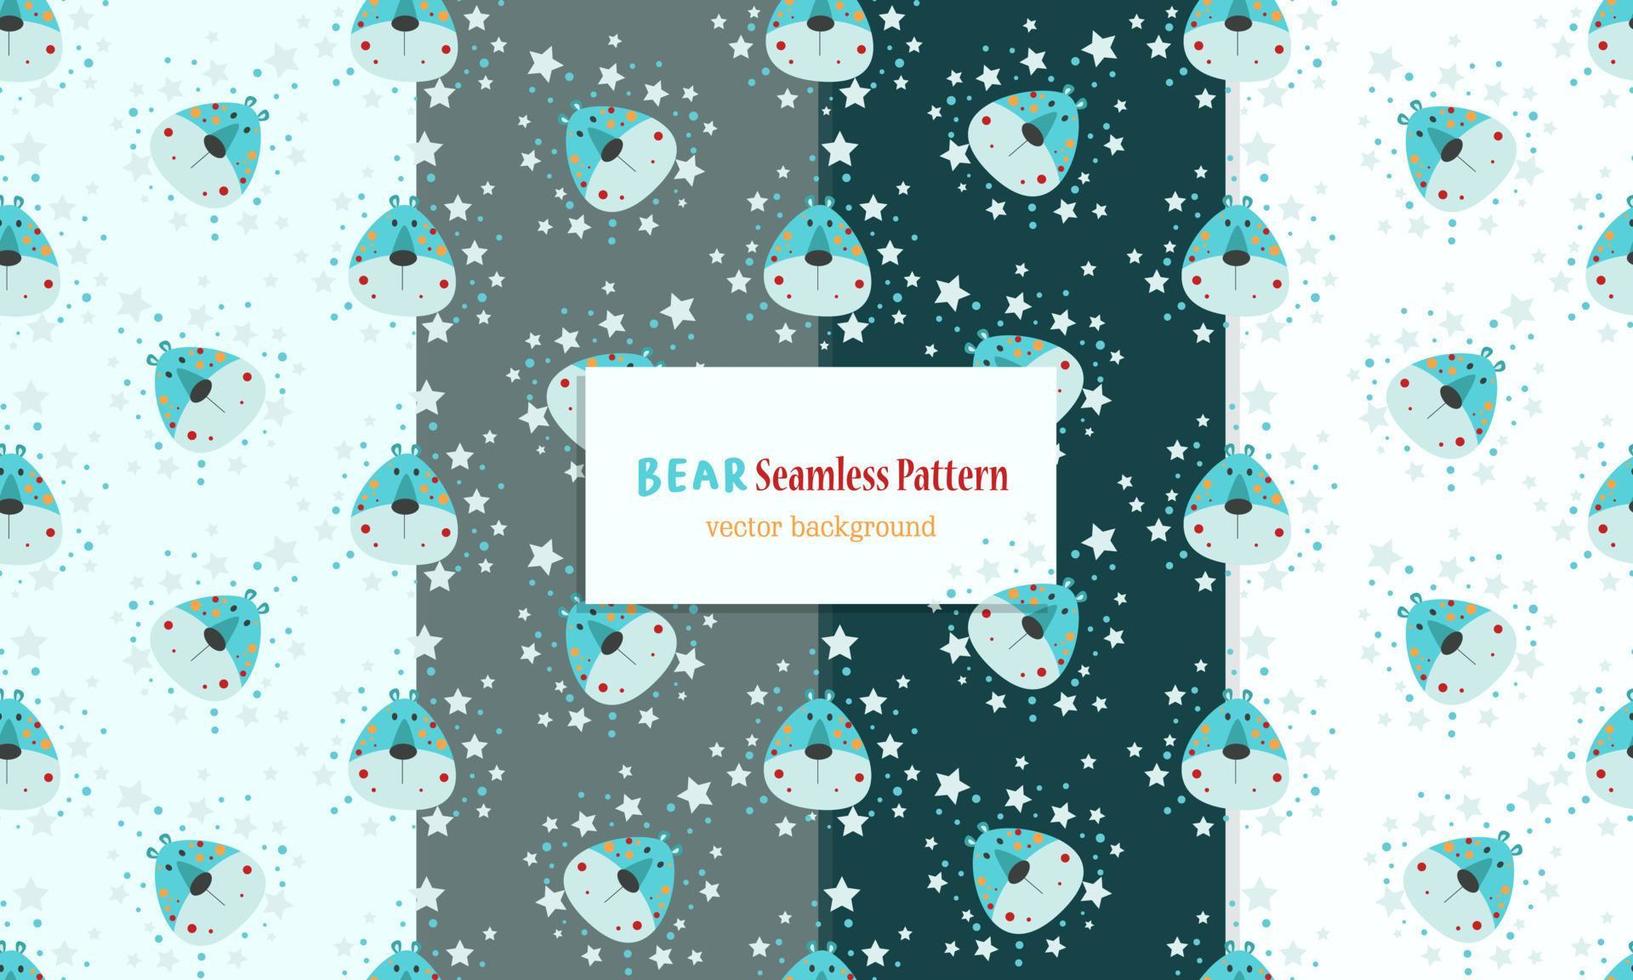 Animal seamless pattern with cute bear design vector